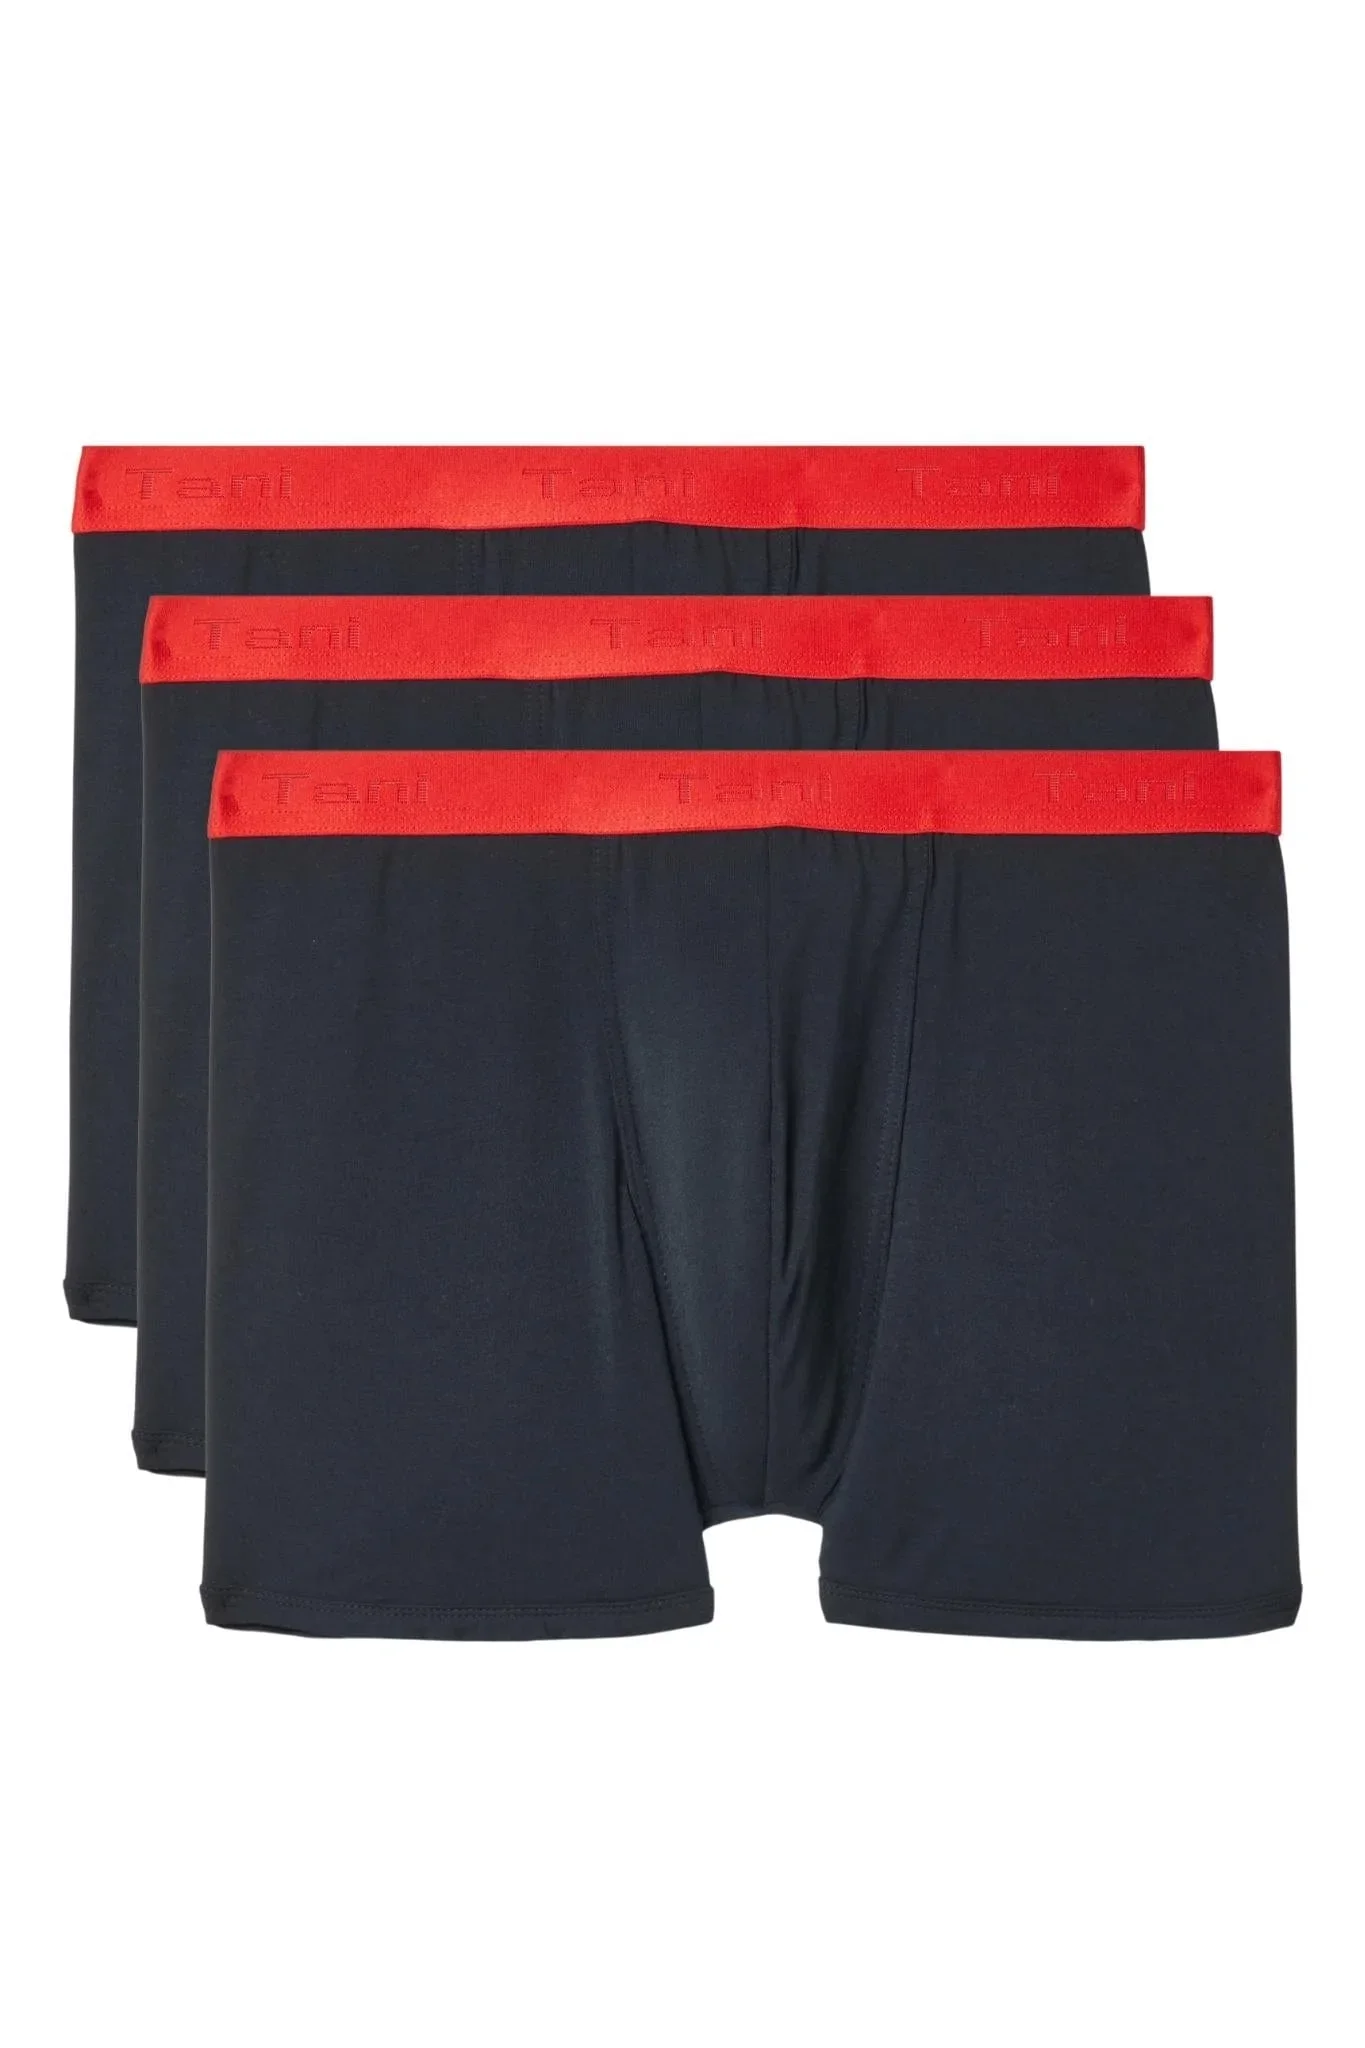 Image of SilkCut Classic Boxer Brief - 3 Pack (BLK/RED)